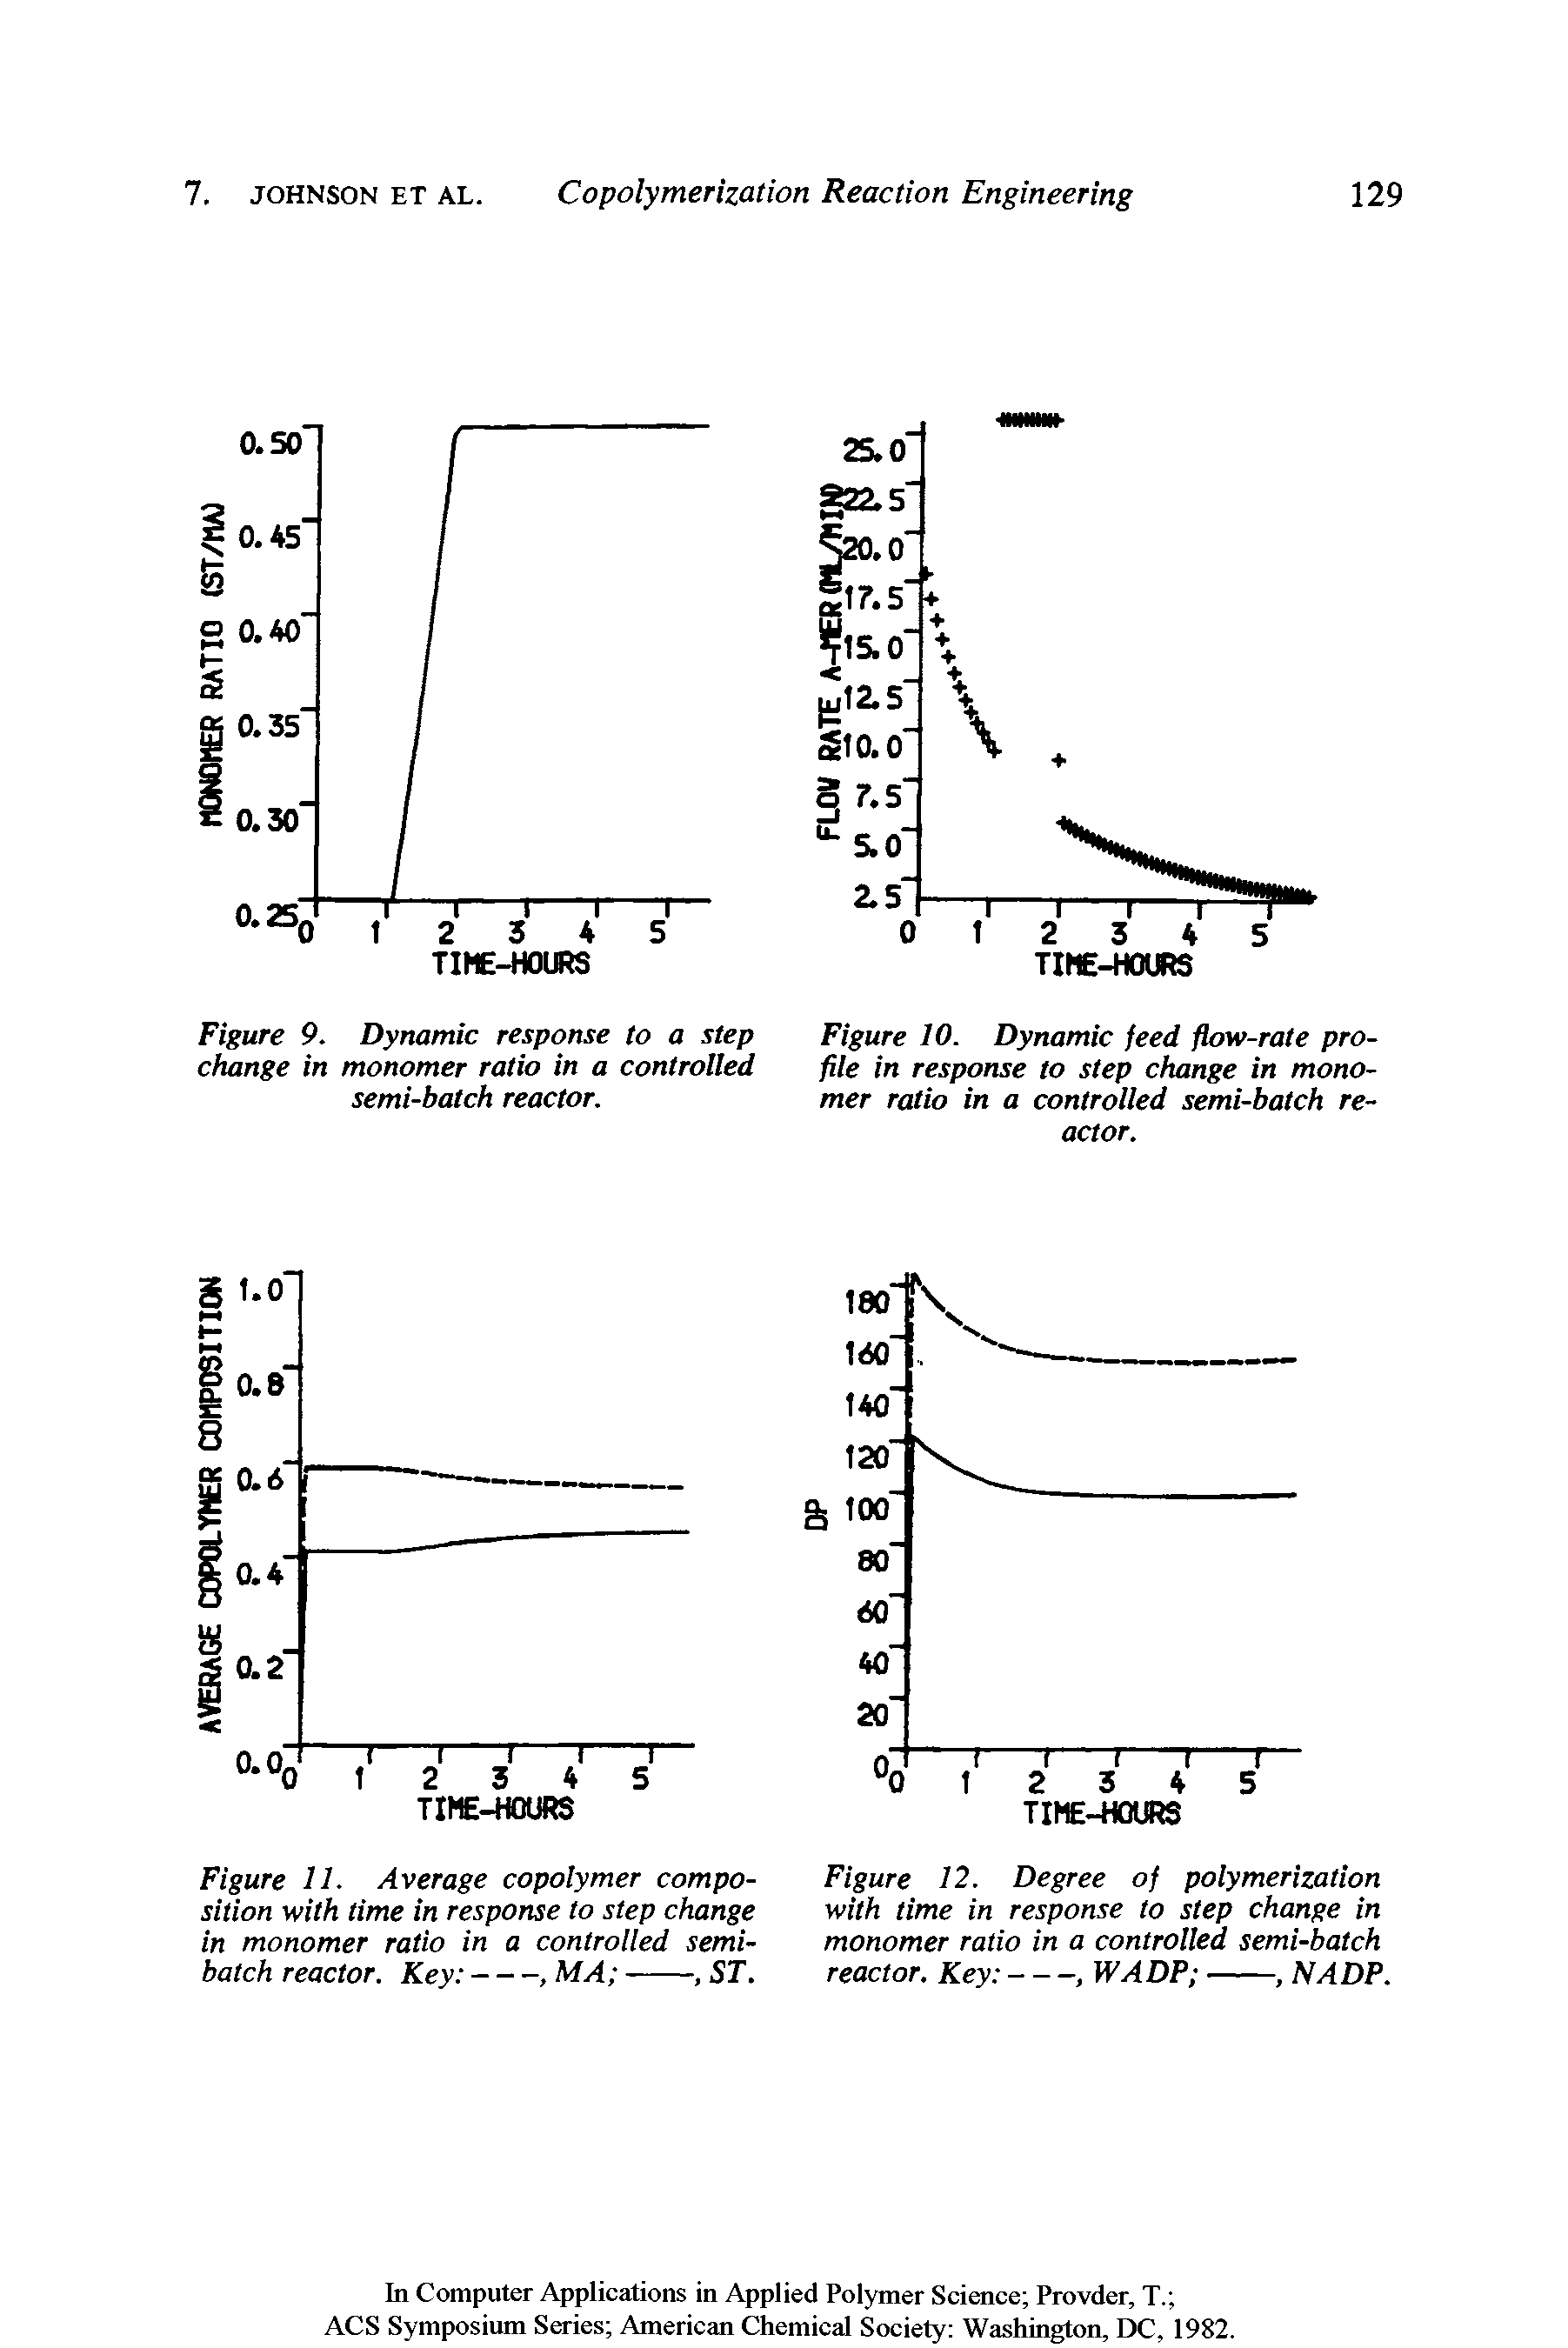 Figure 10. Dynamic feed flow-rate profile in response to step change in monomer ratio in a controlled semi-batch reactor.